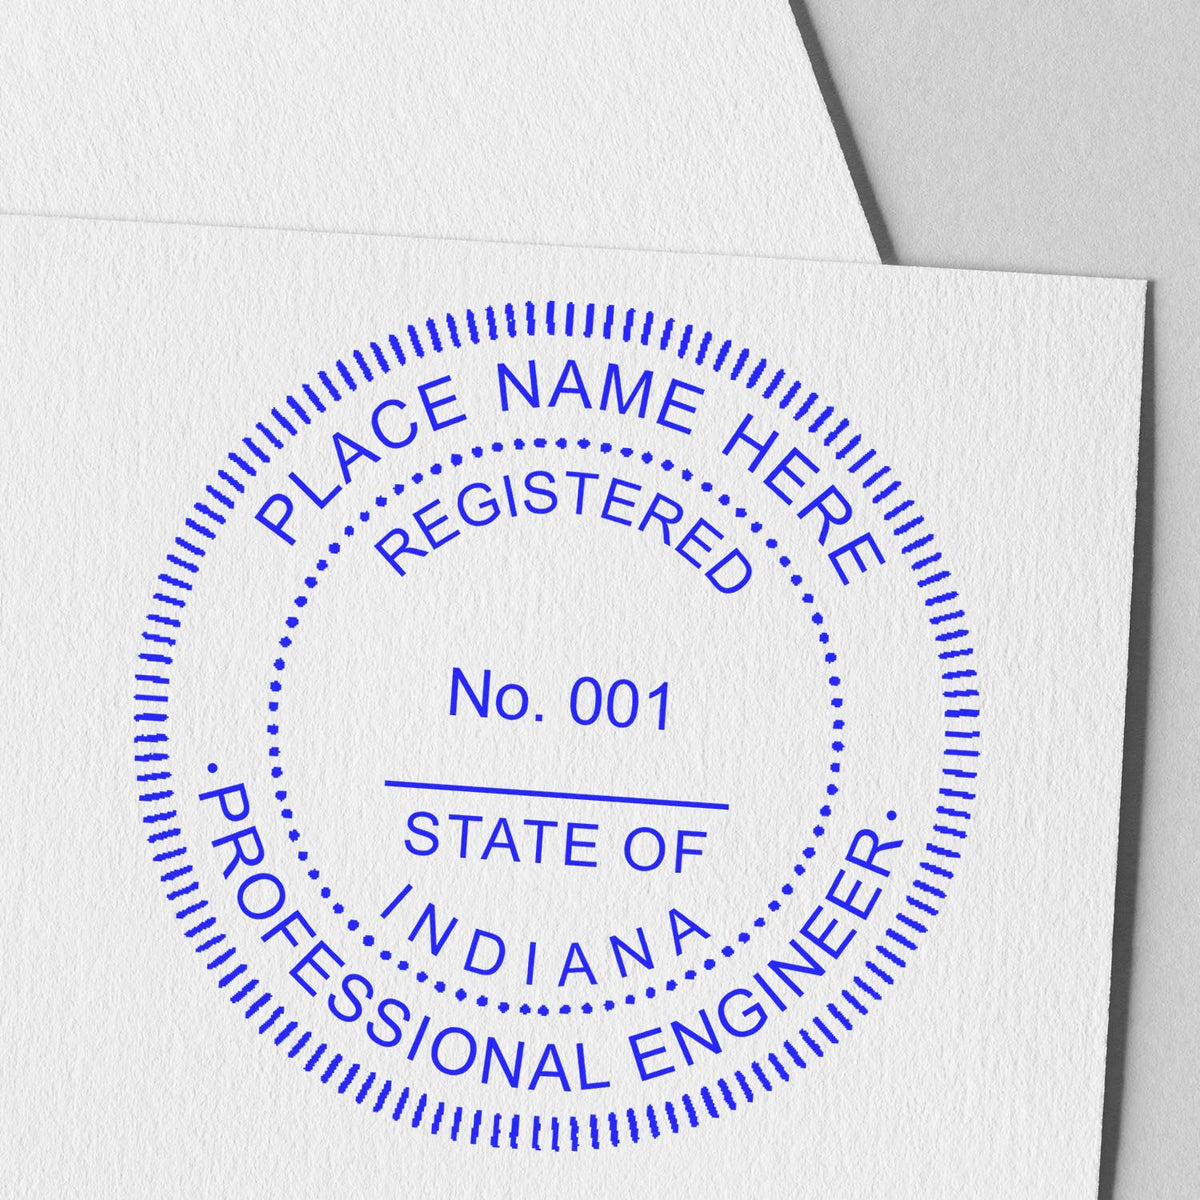 The Slim Pre-Inked Indiana Professional Engineer Seal Stamp stamp impression comes to life with a crisp, detailed photo on paper - showcasing true professional quality.